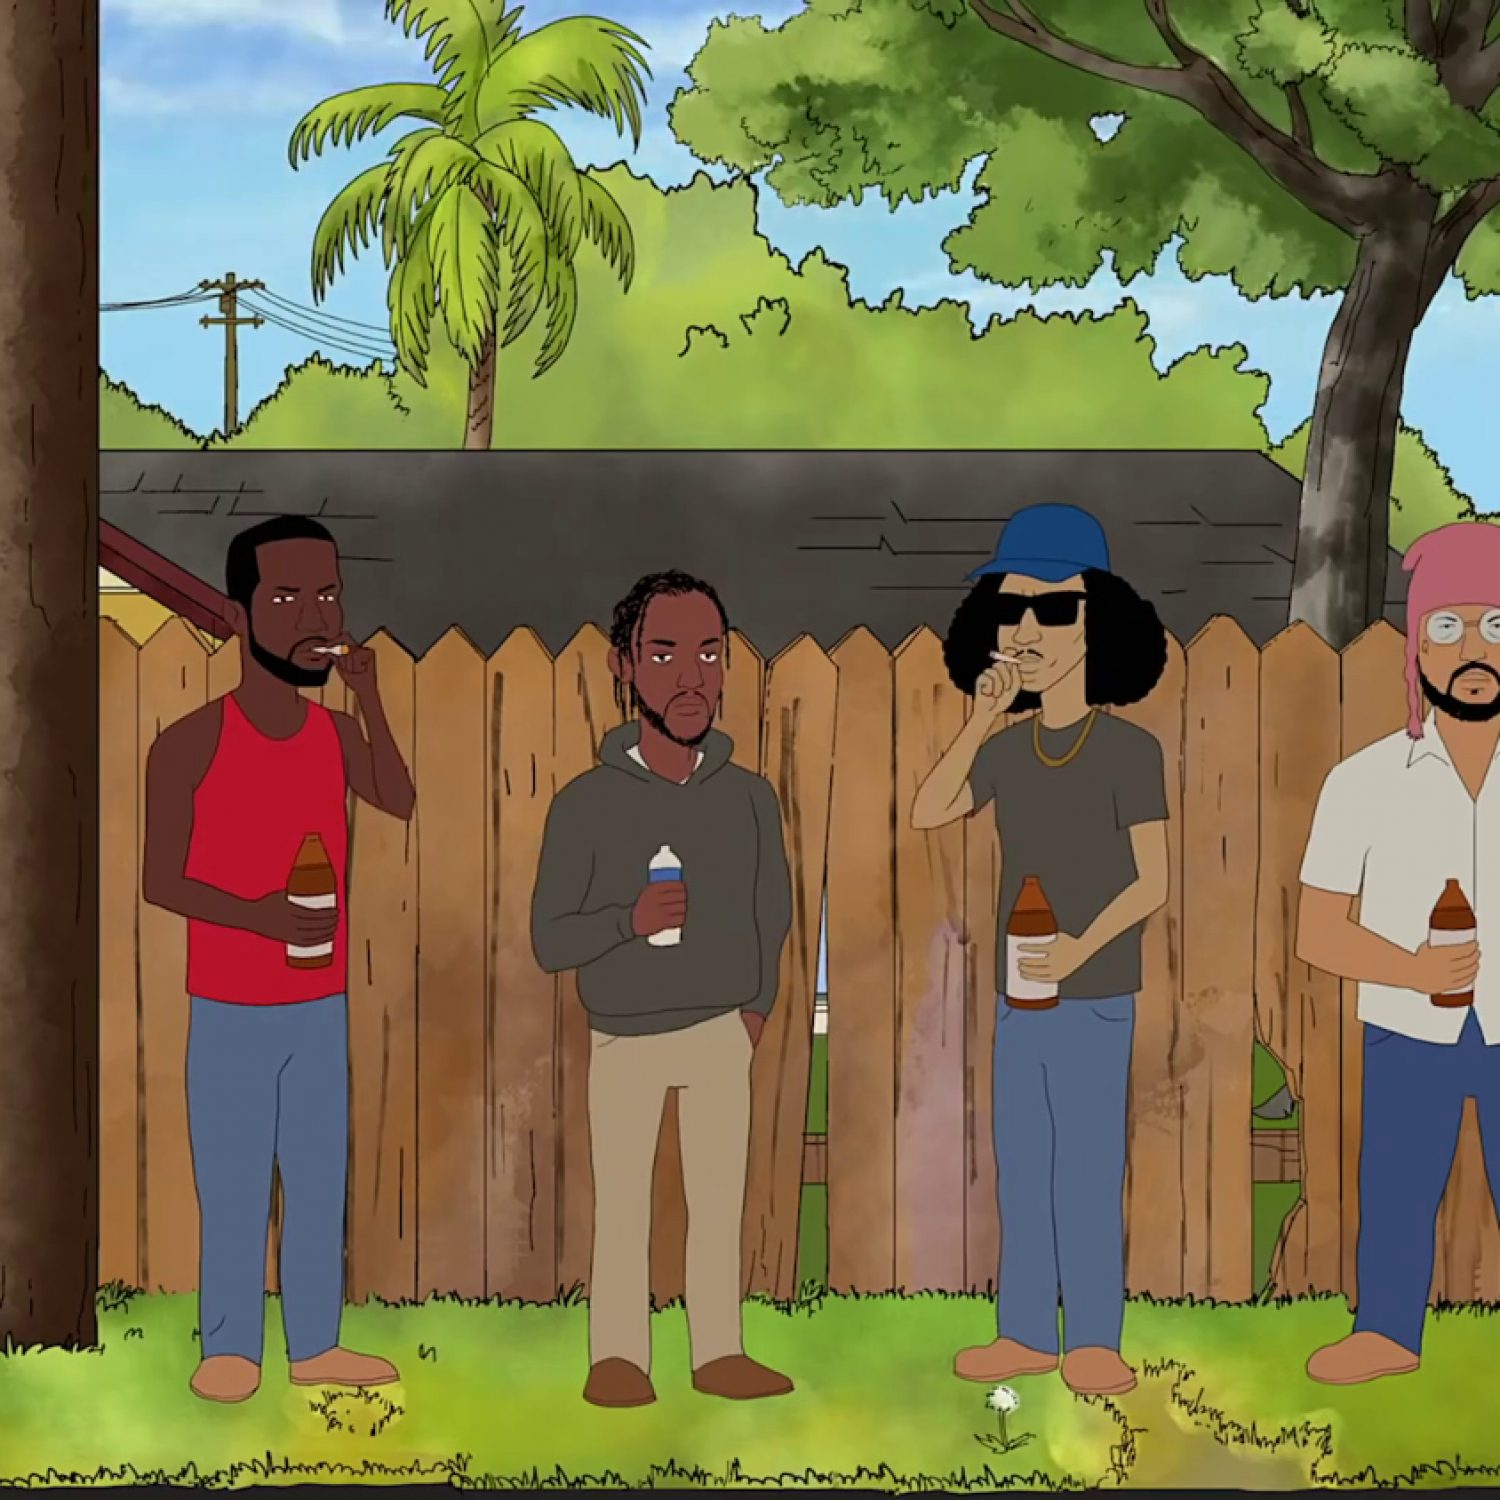 Black Hippy = King of The Hill in the SiR - John Redcorn Video — KNOTORYUS